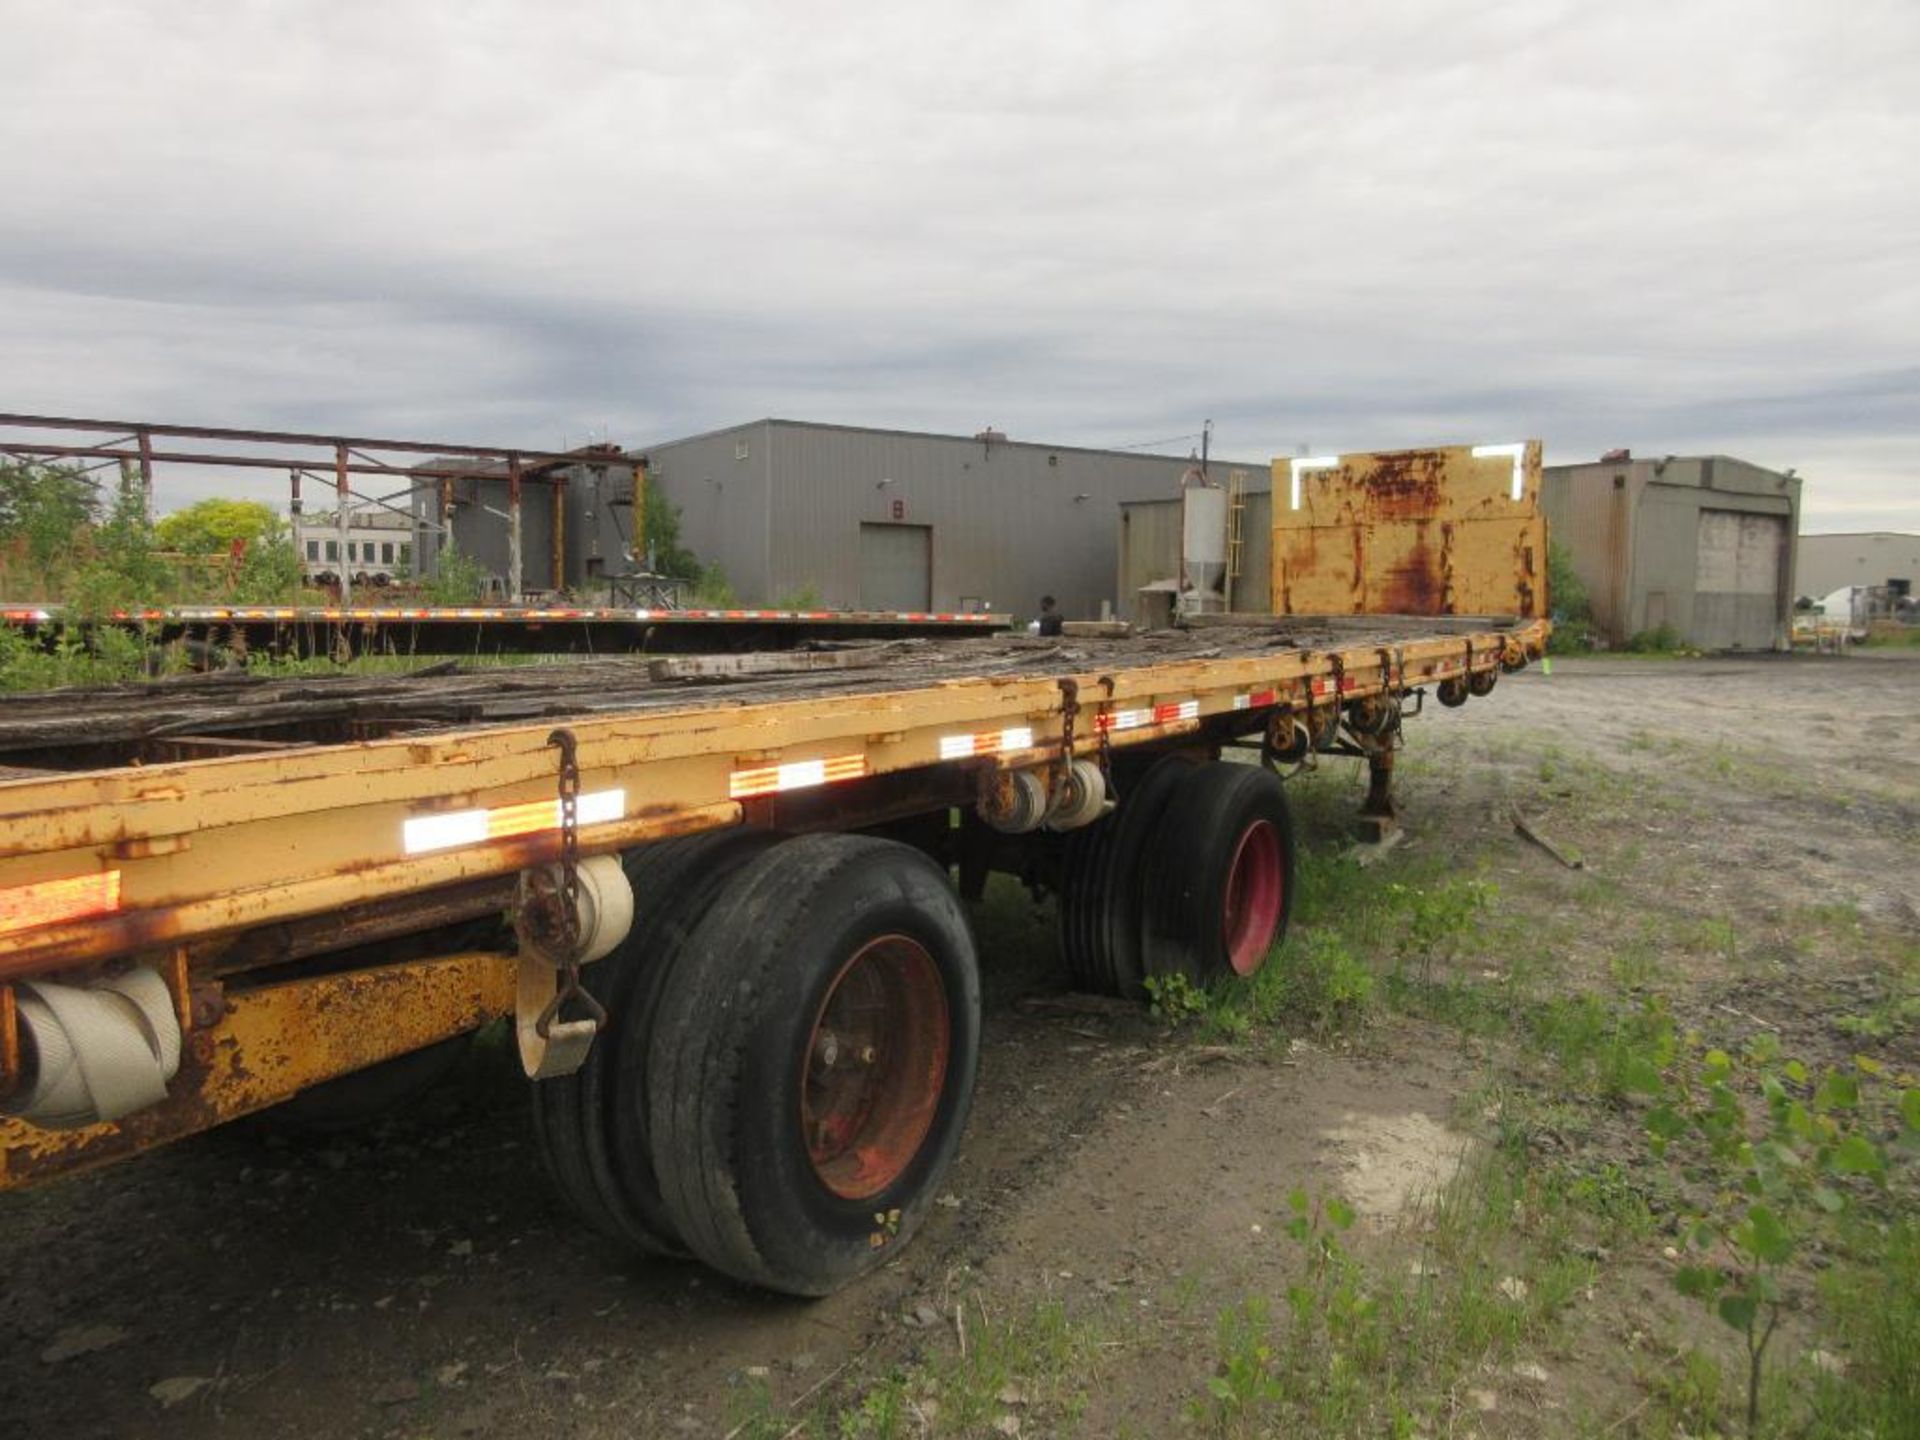 1967 CANCAR, 44' TRAILER, VIN 671026 (NORTH WEST YARD) *AUCTIONEER'S NOTE: YARD TRAILER, NO OWNERSHI - Image 10 of 10